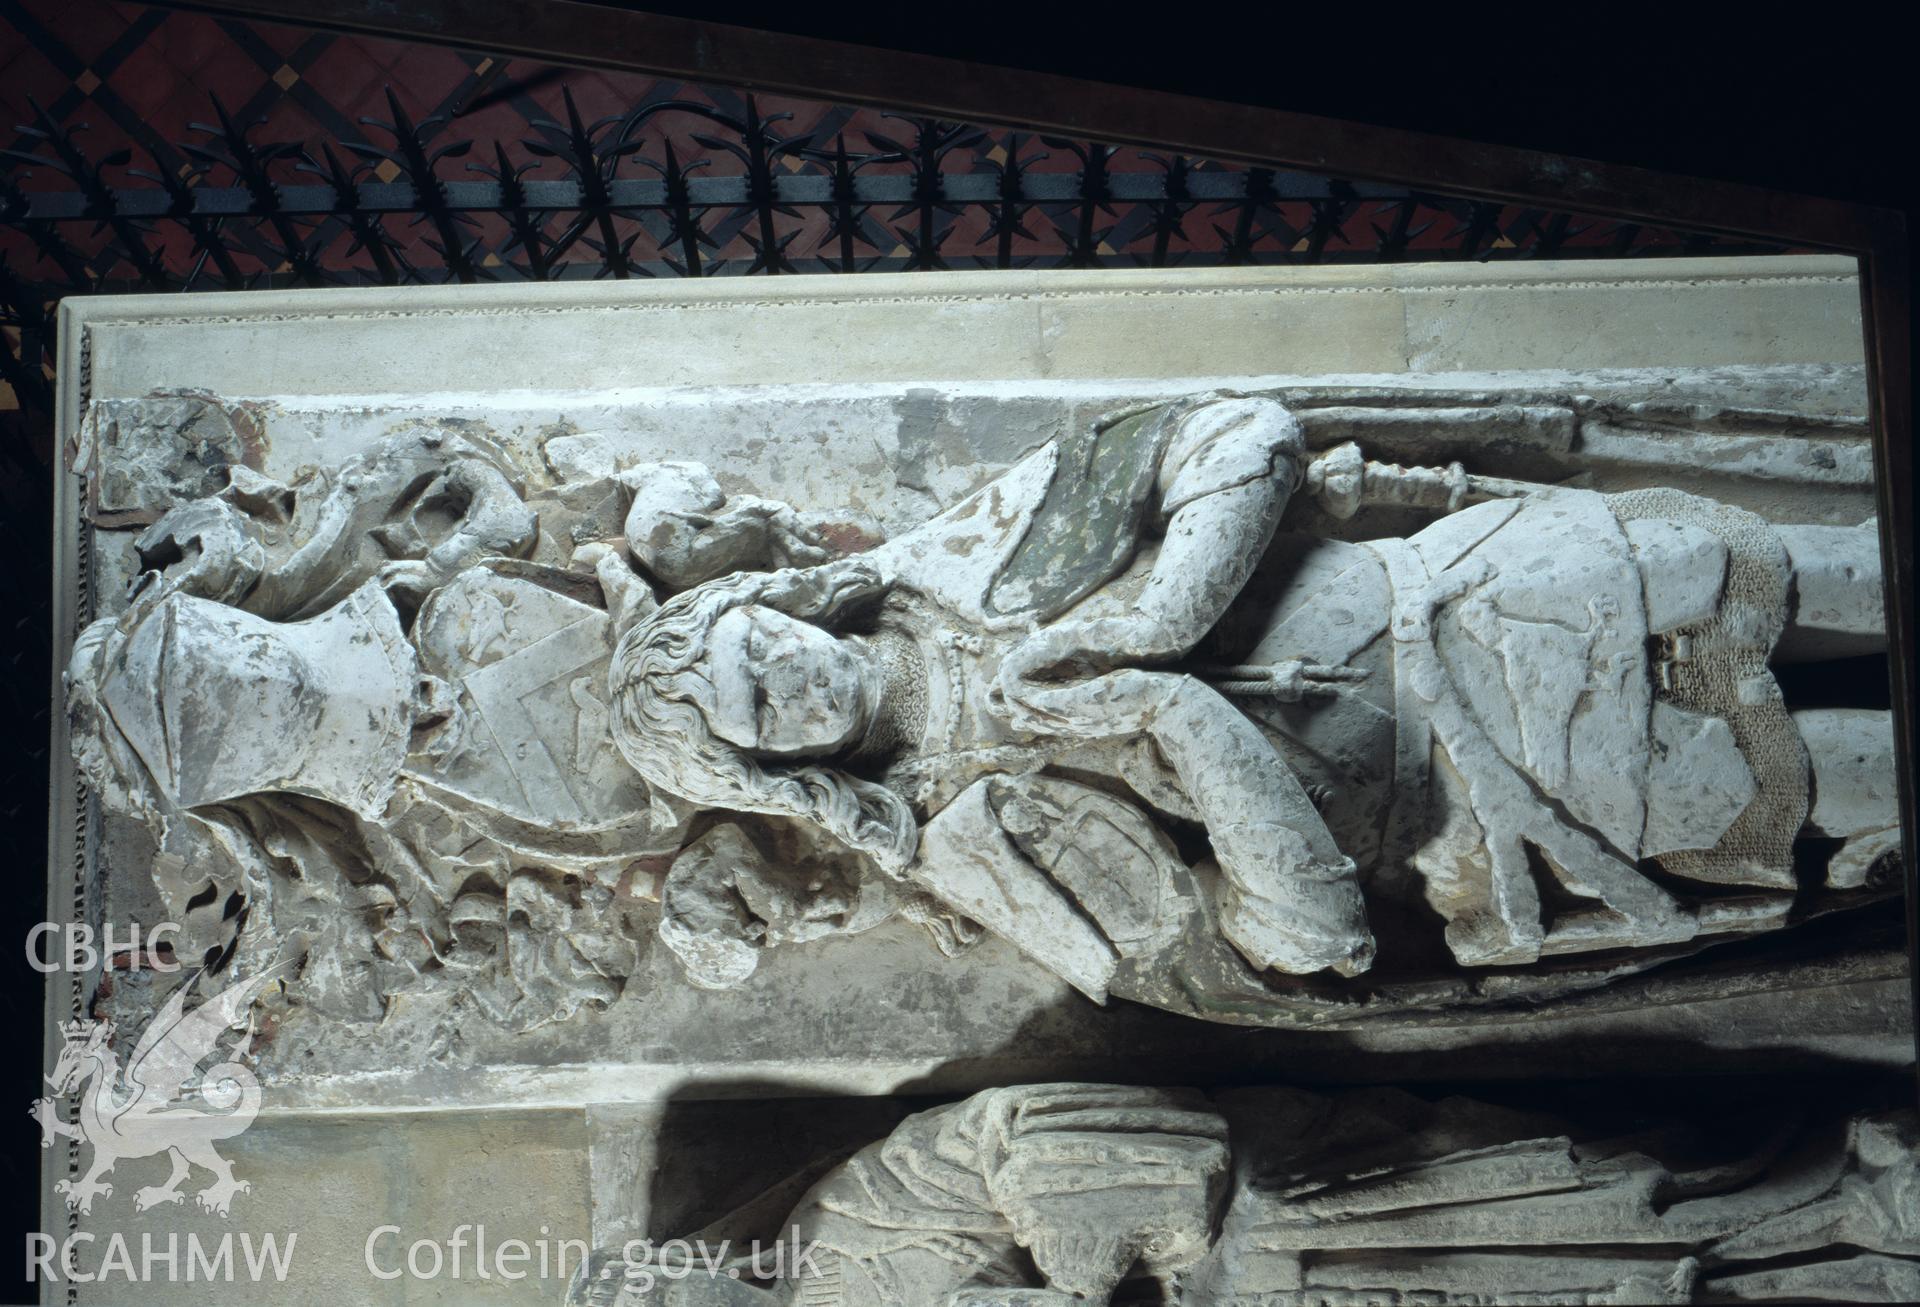 RCAHMW colour transparency showing detail of a monument to Sir Rhys ap Thomas, in St Peter's Church, Carmarthen.